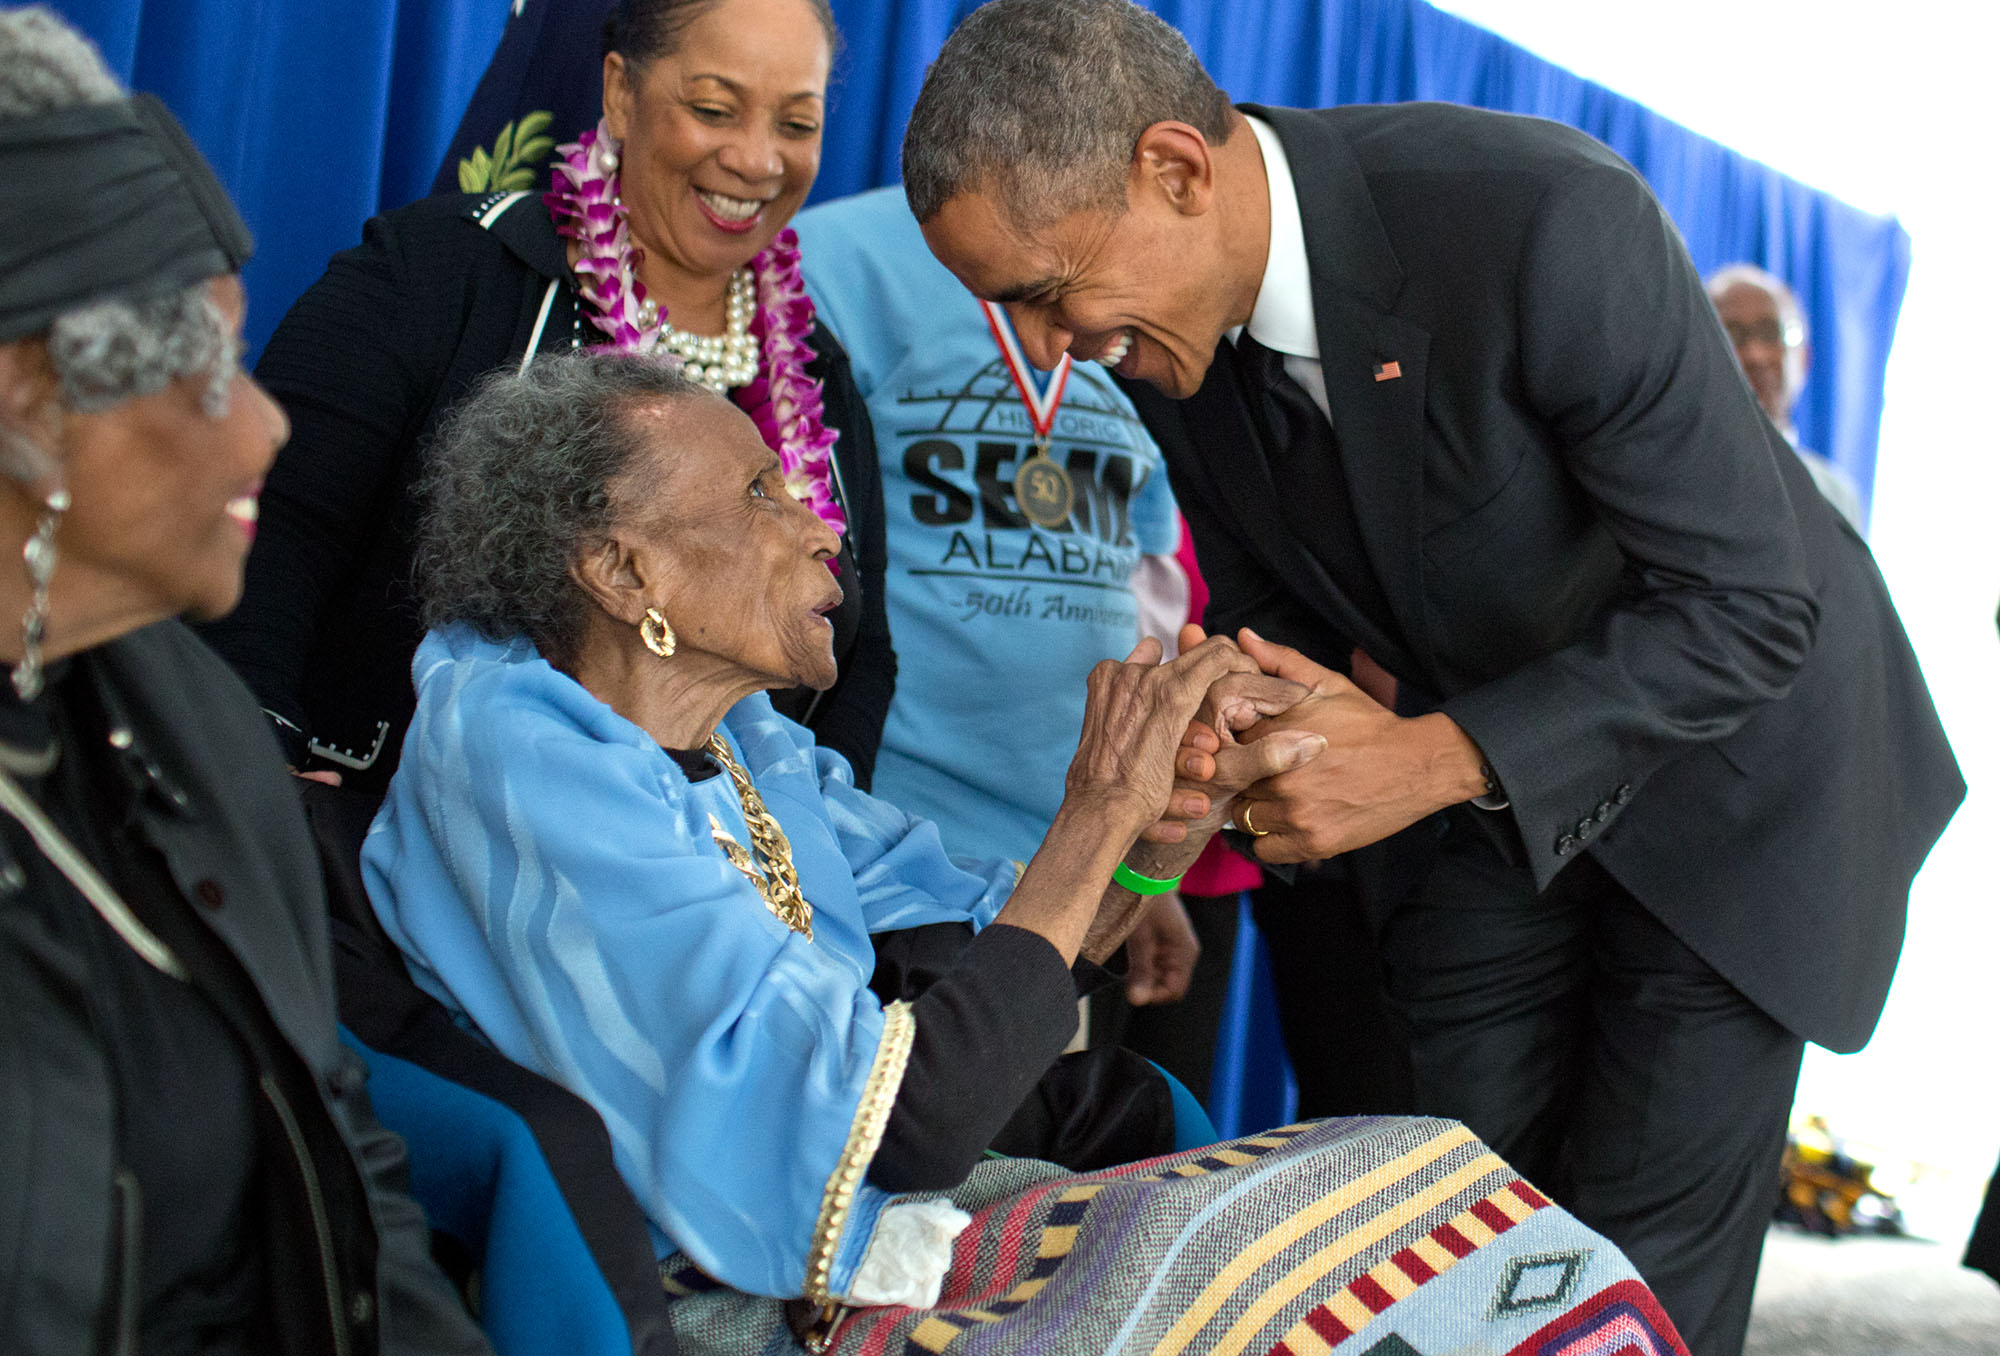 In Selma, the President greets former foot soldier Amelia Boynton Robinson, 103 years old, backstage before the ceremony. (Official White House Photo by Pete Souza)